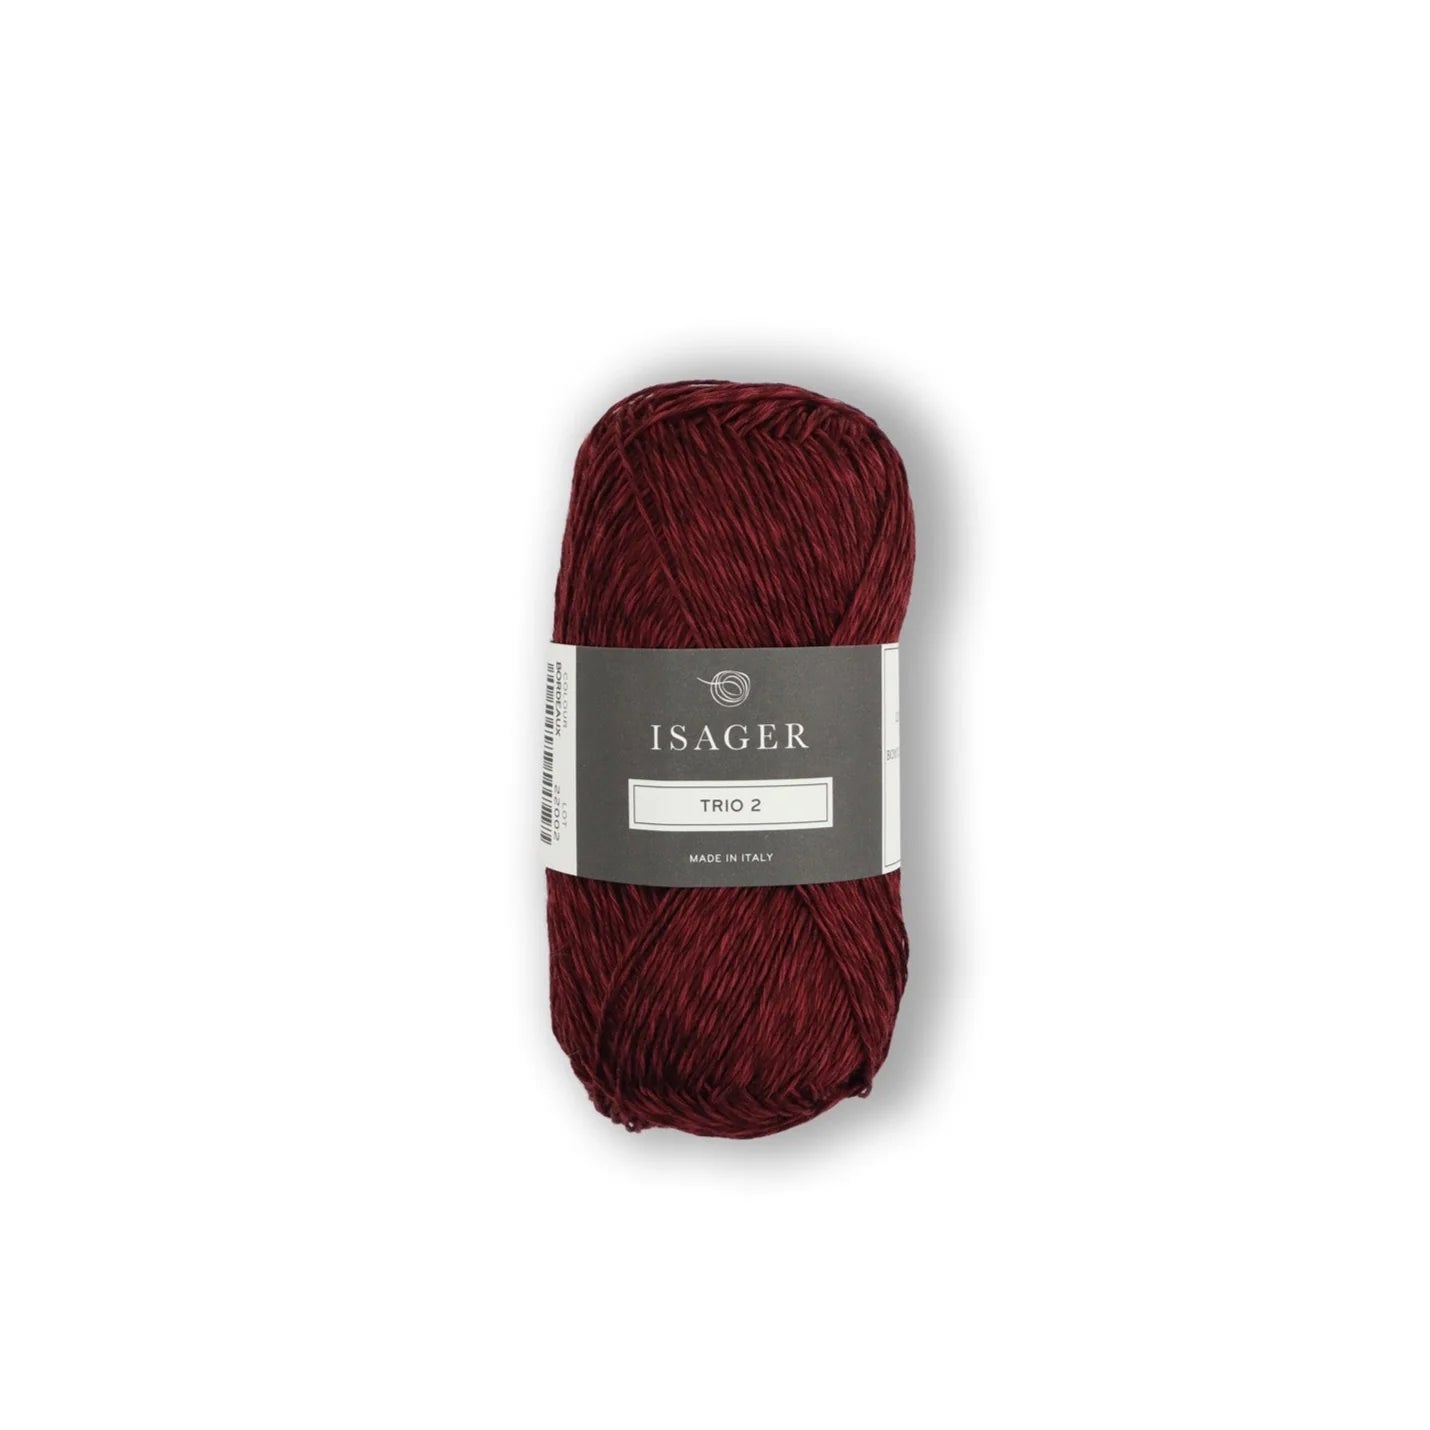 Isager Trio 2 - Bordeaux - 5 Ply - Cotton - The Little Yarn Store